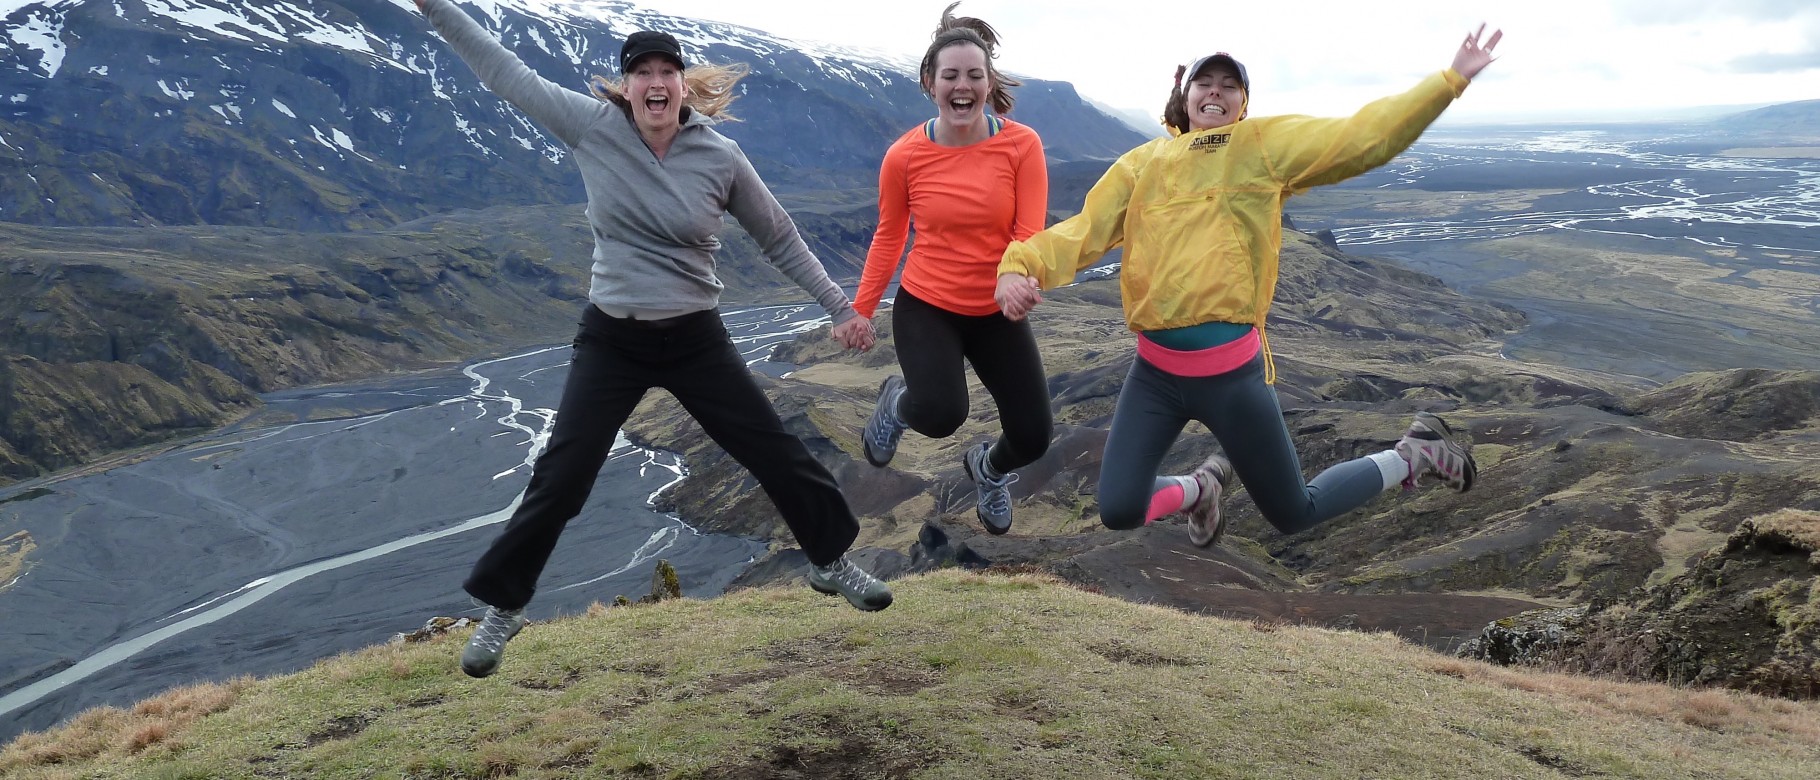 Lara Carlson and students Kaylee LeCavalier and Courtney Farrar in Iceland